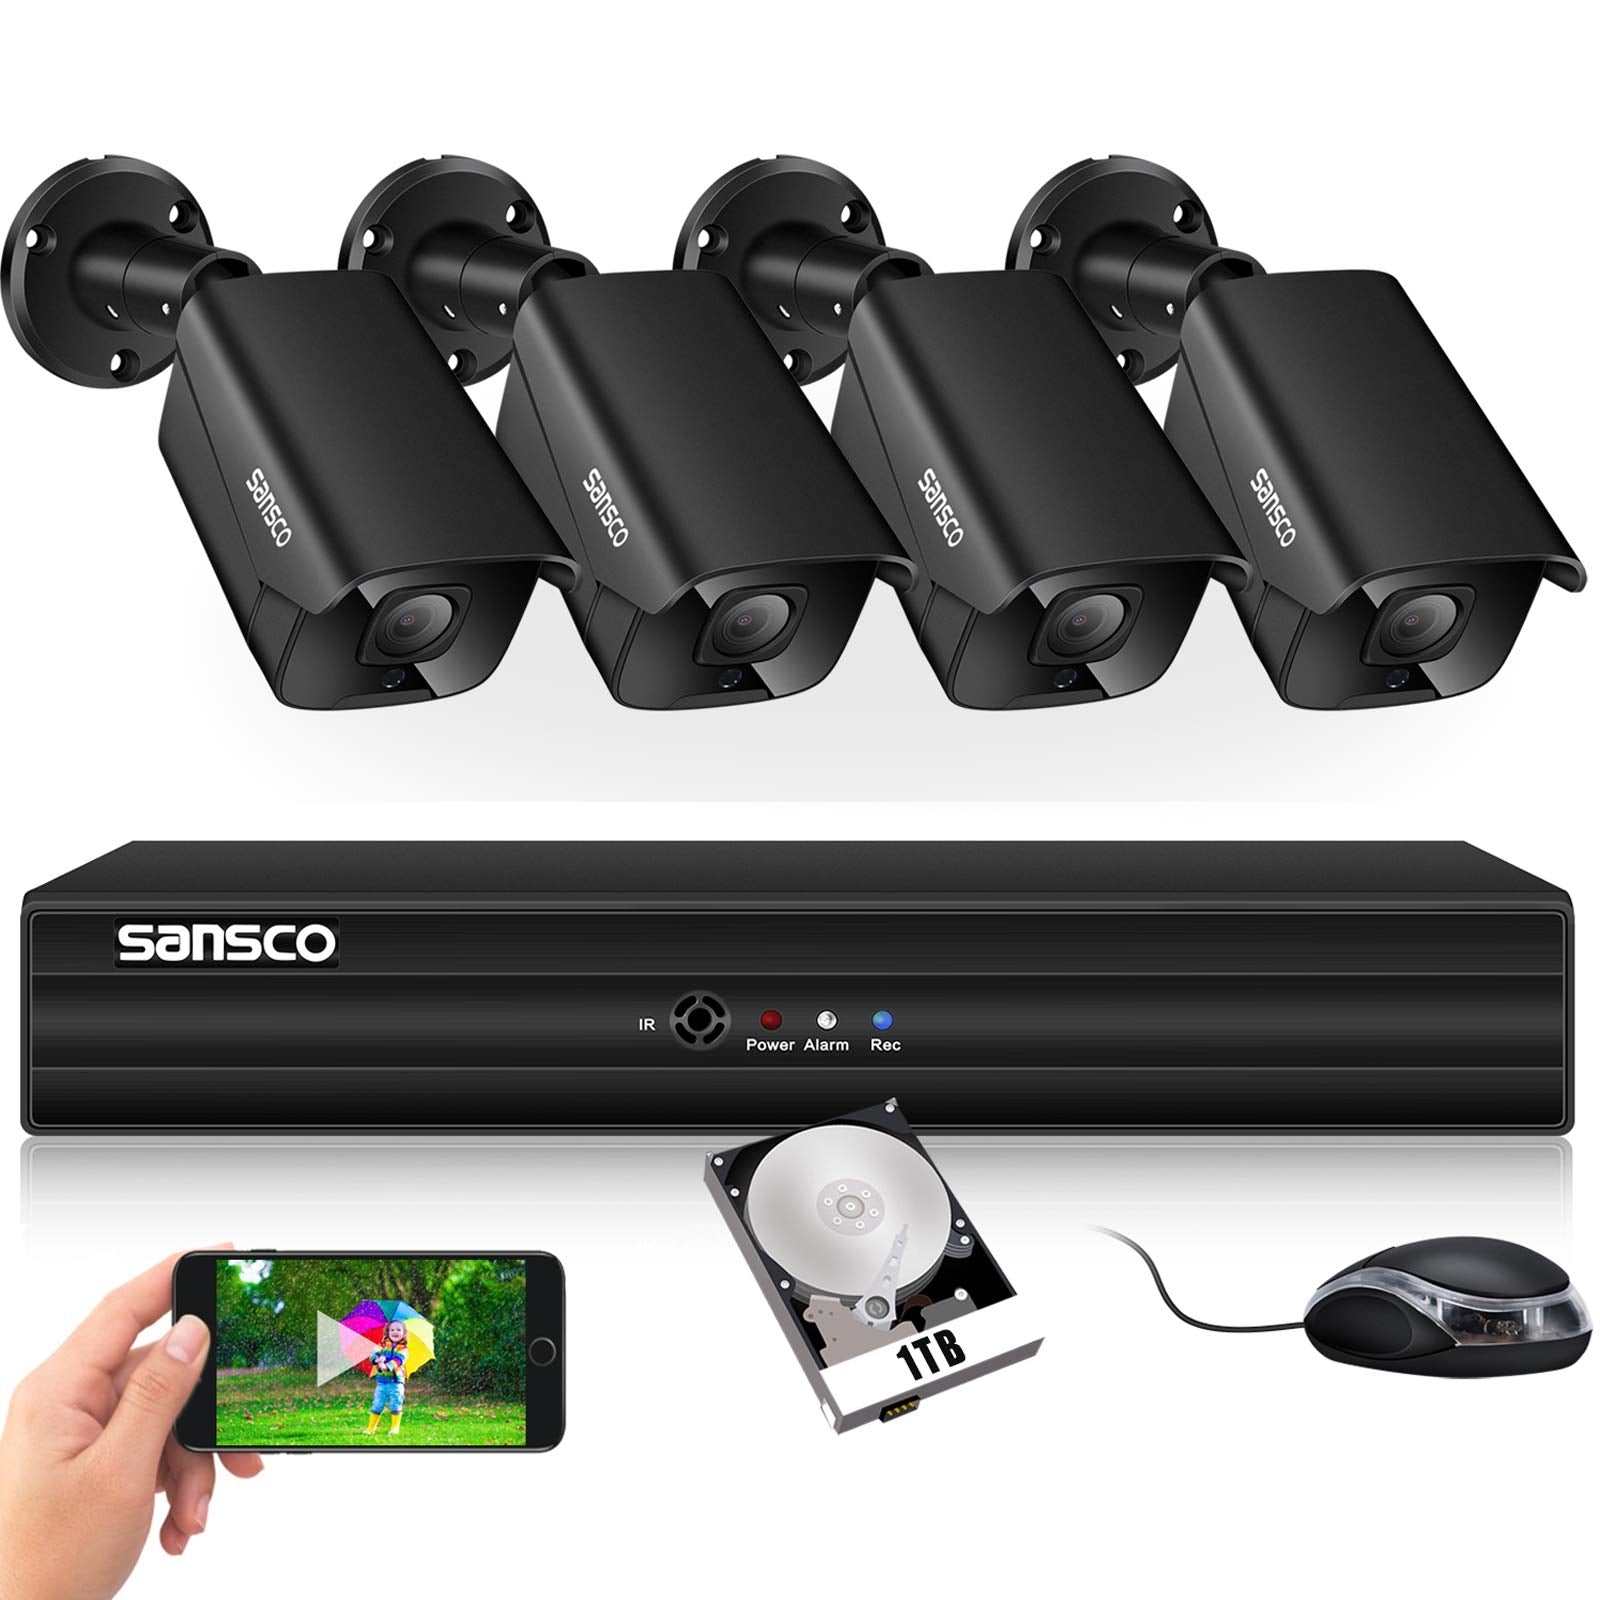 SANSCO 1080p True HD Outdoor CCTV Camera System + 1TB HDD, 5MP DVR with Hard Drive Disk, (4) 2MP Waterproof Home/Office Security Cameras, Motion Detection/Recording, Email & App Alert, All Metal Housing Vandalism